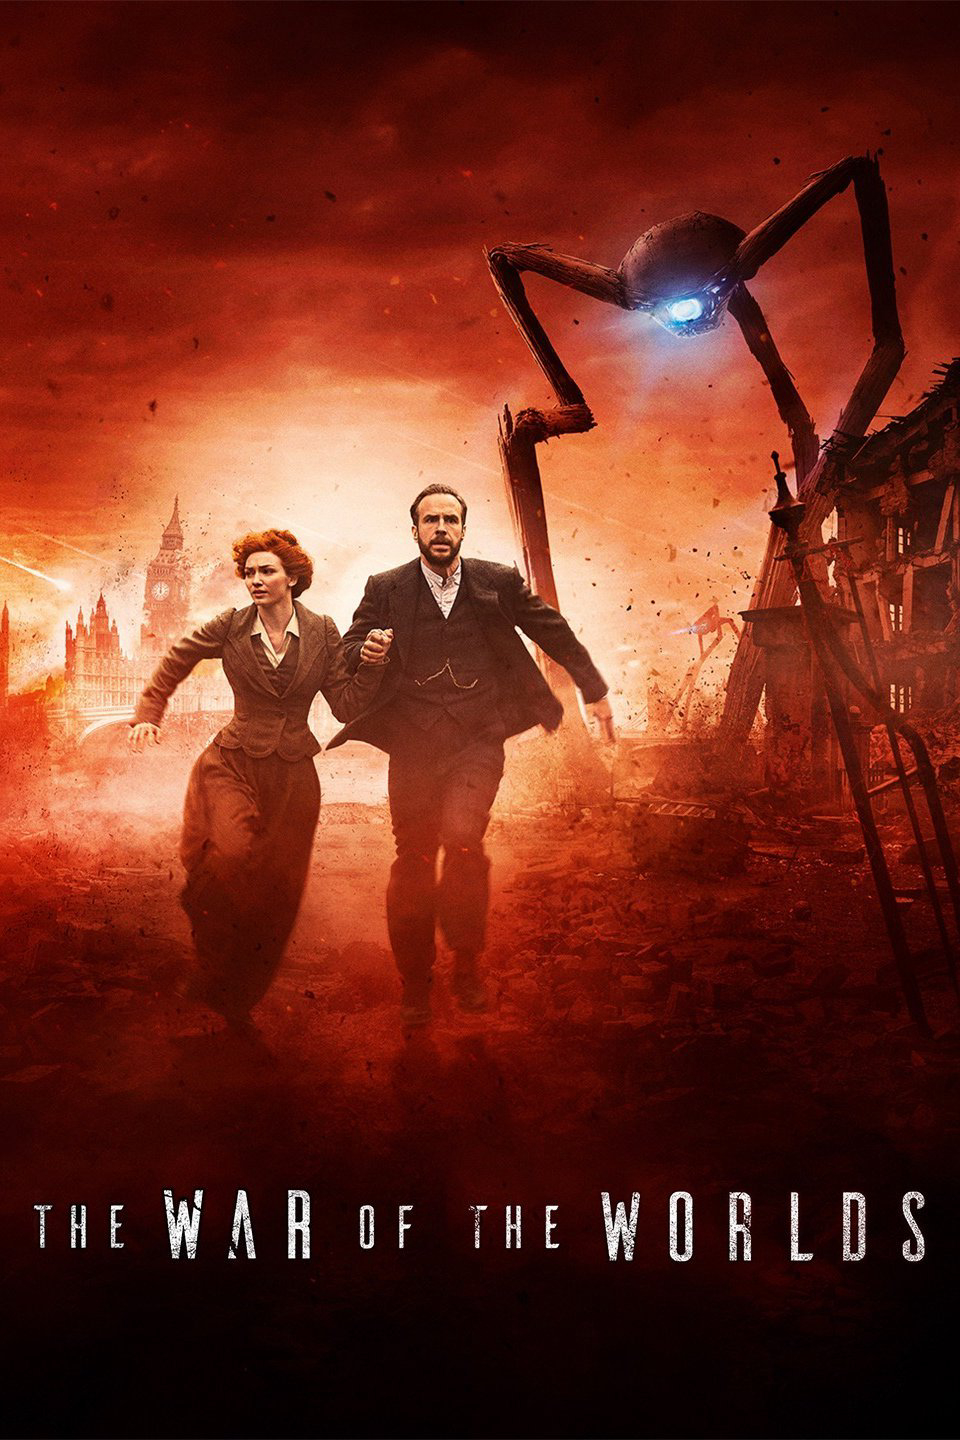 Poster Phim Đại chiến thế giới (War of the Worlds)